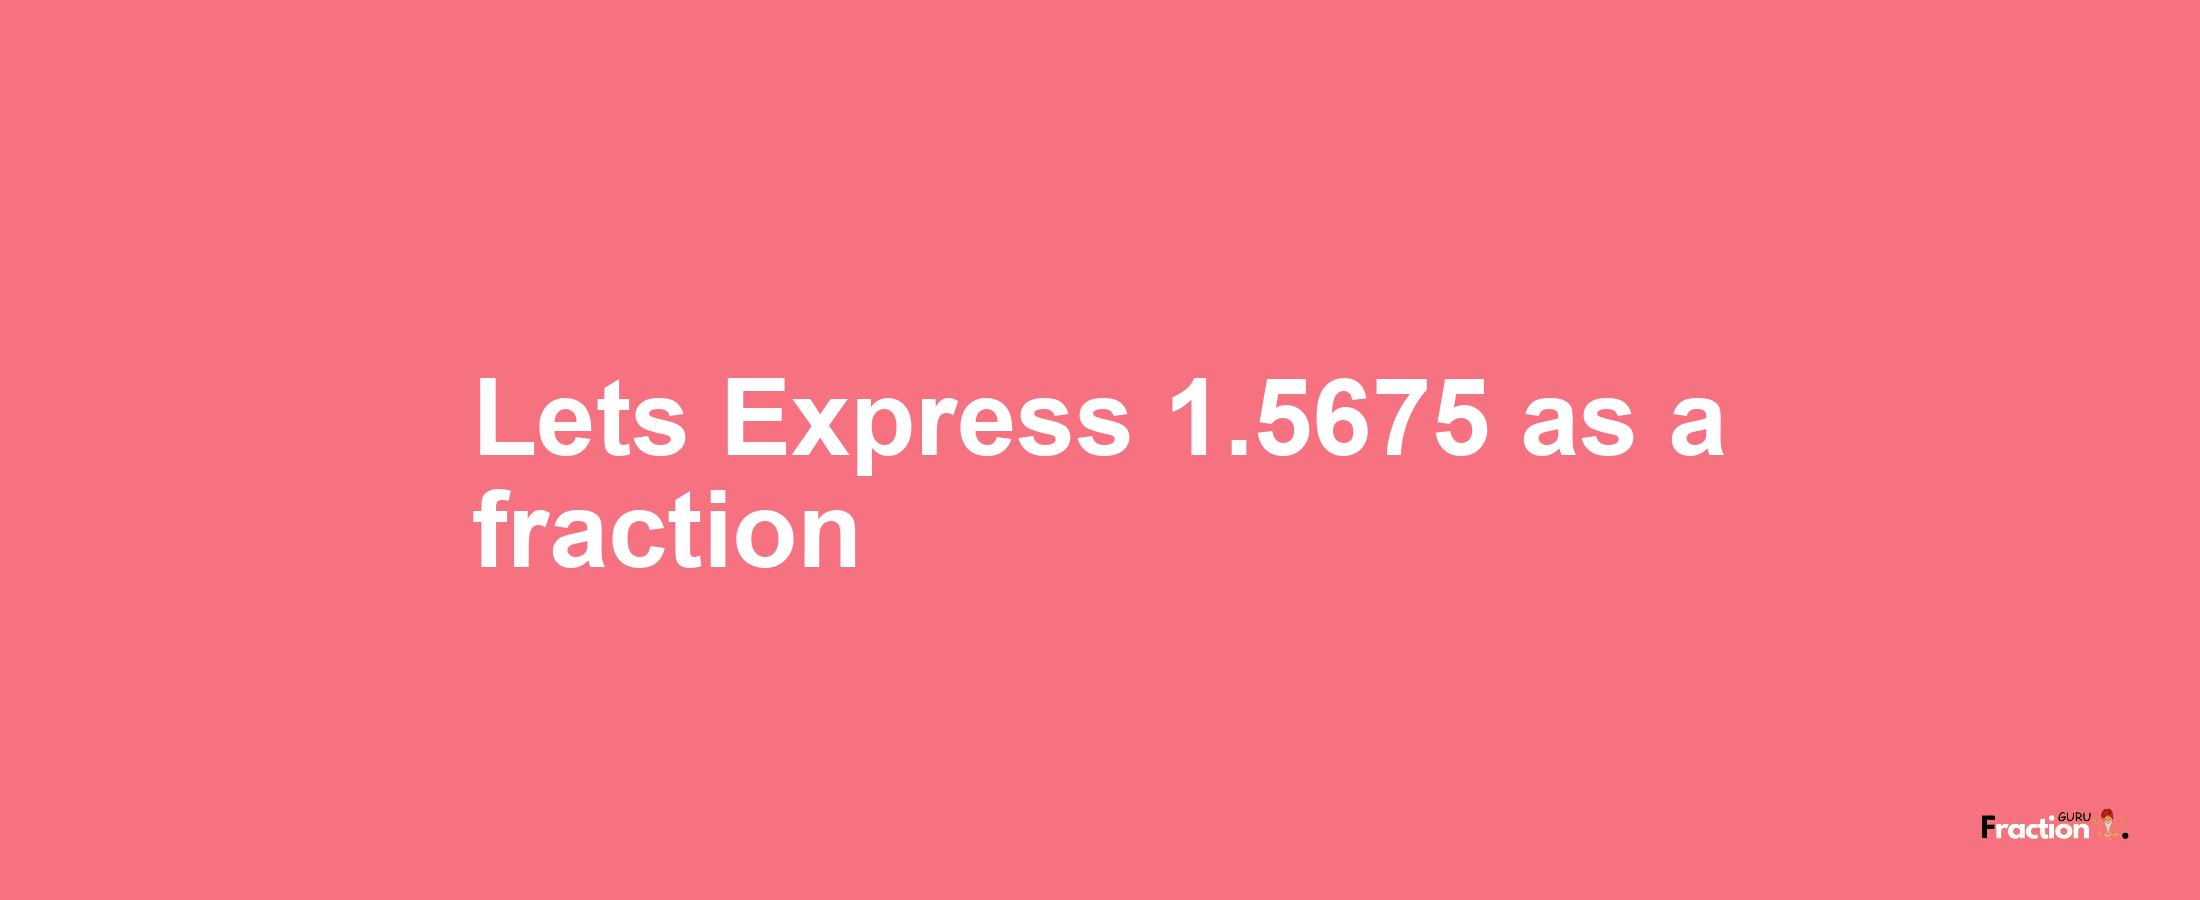 Lets Express 1.5675 as afraction